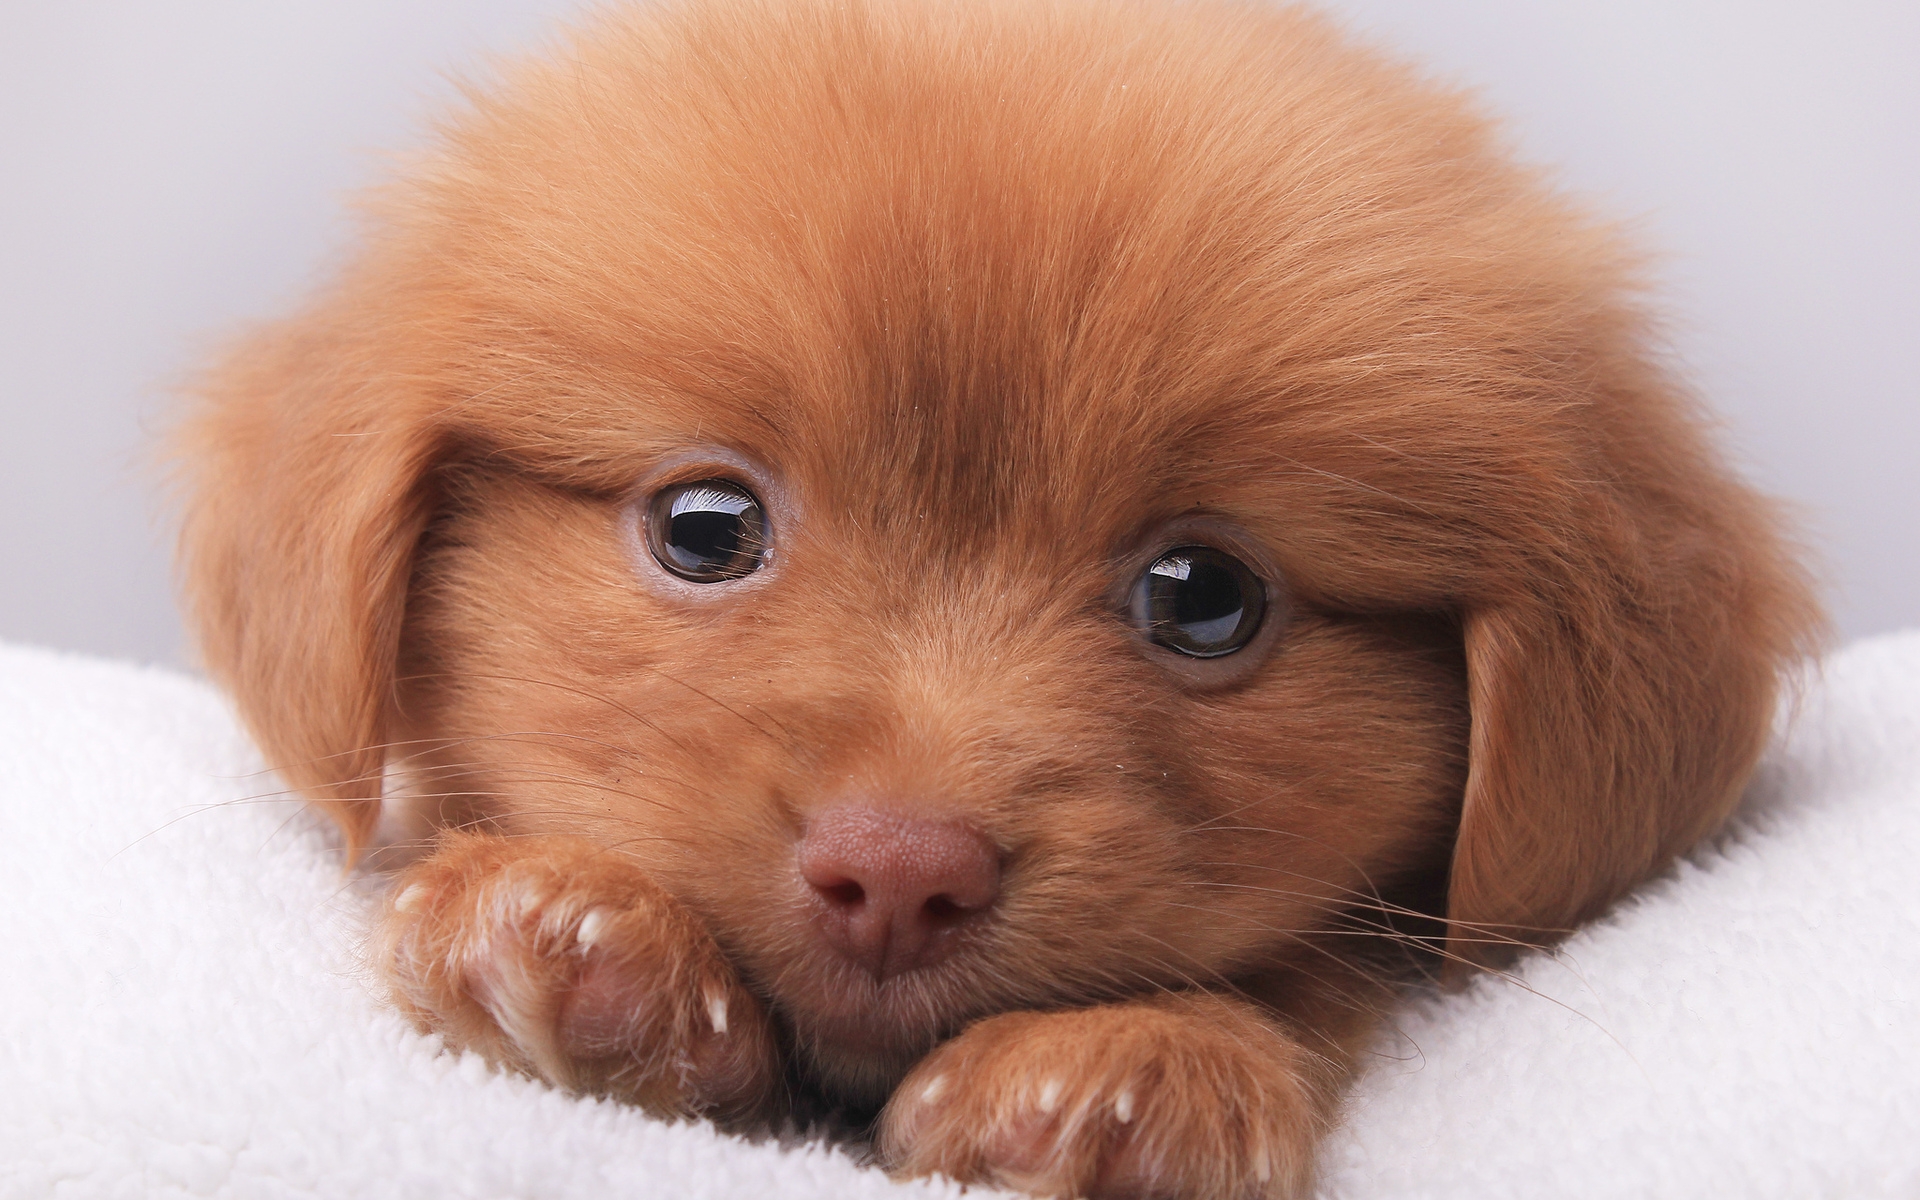 this is a photo of a cute puppy